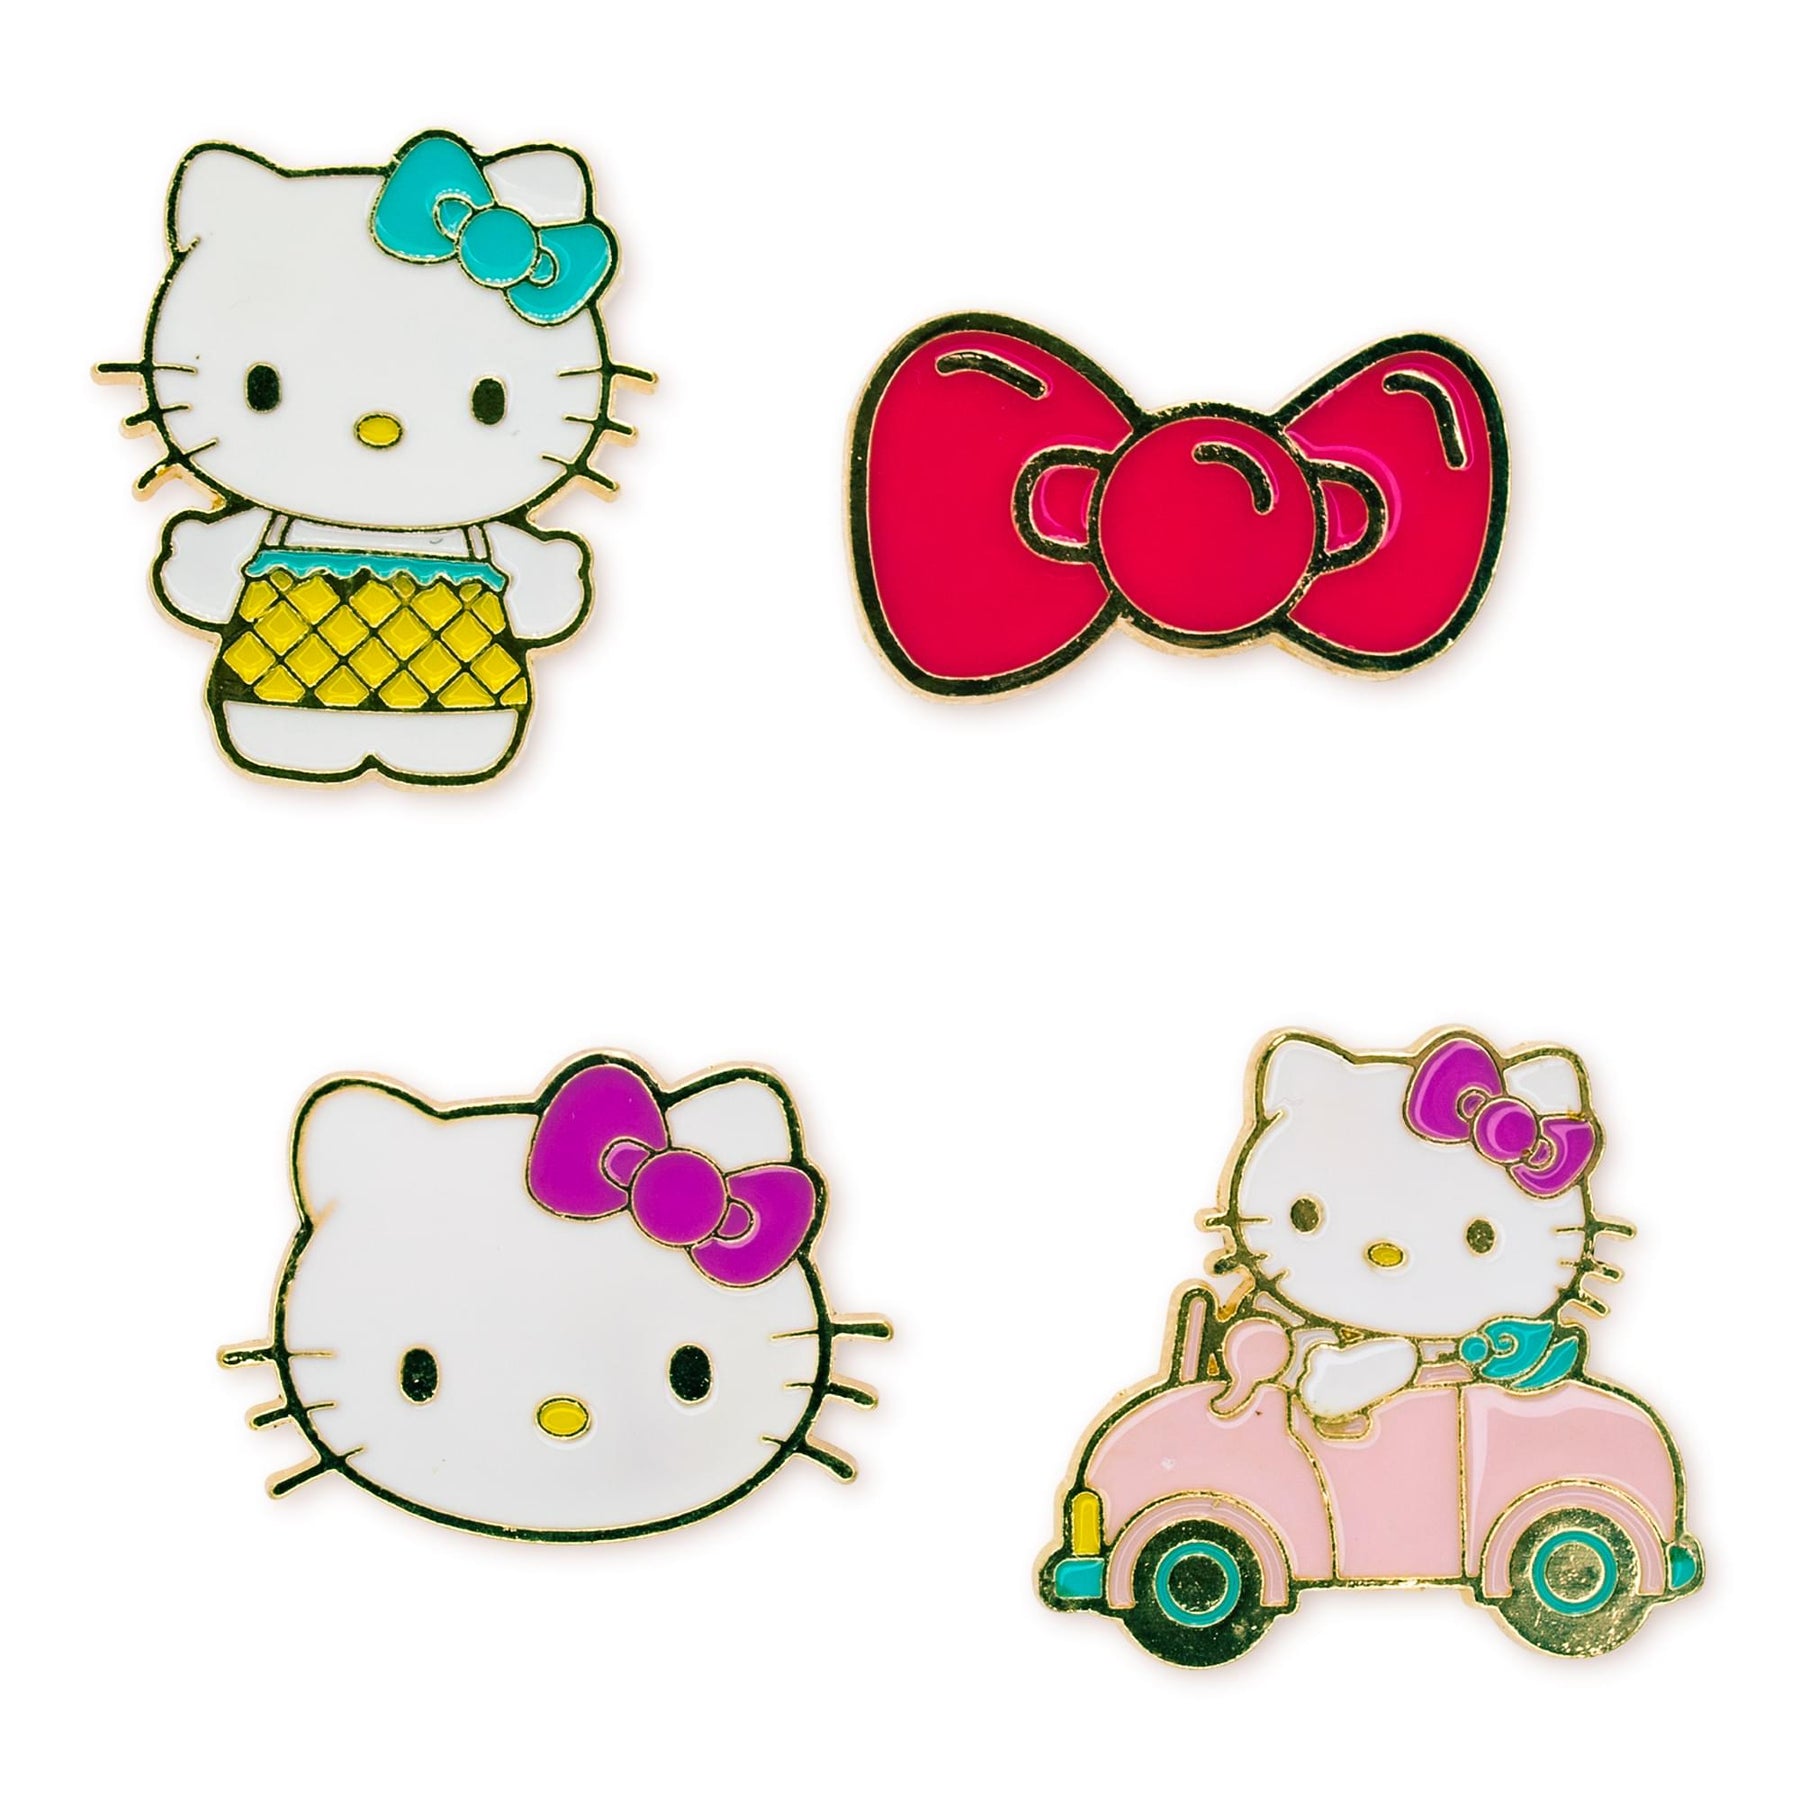 Sanrio Iconic Series - Hello Kitty 3 Limited Edition 300 Pin